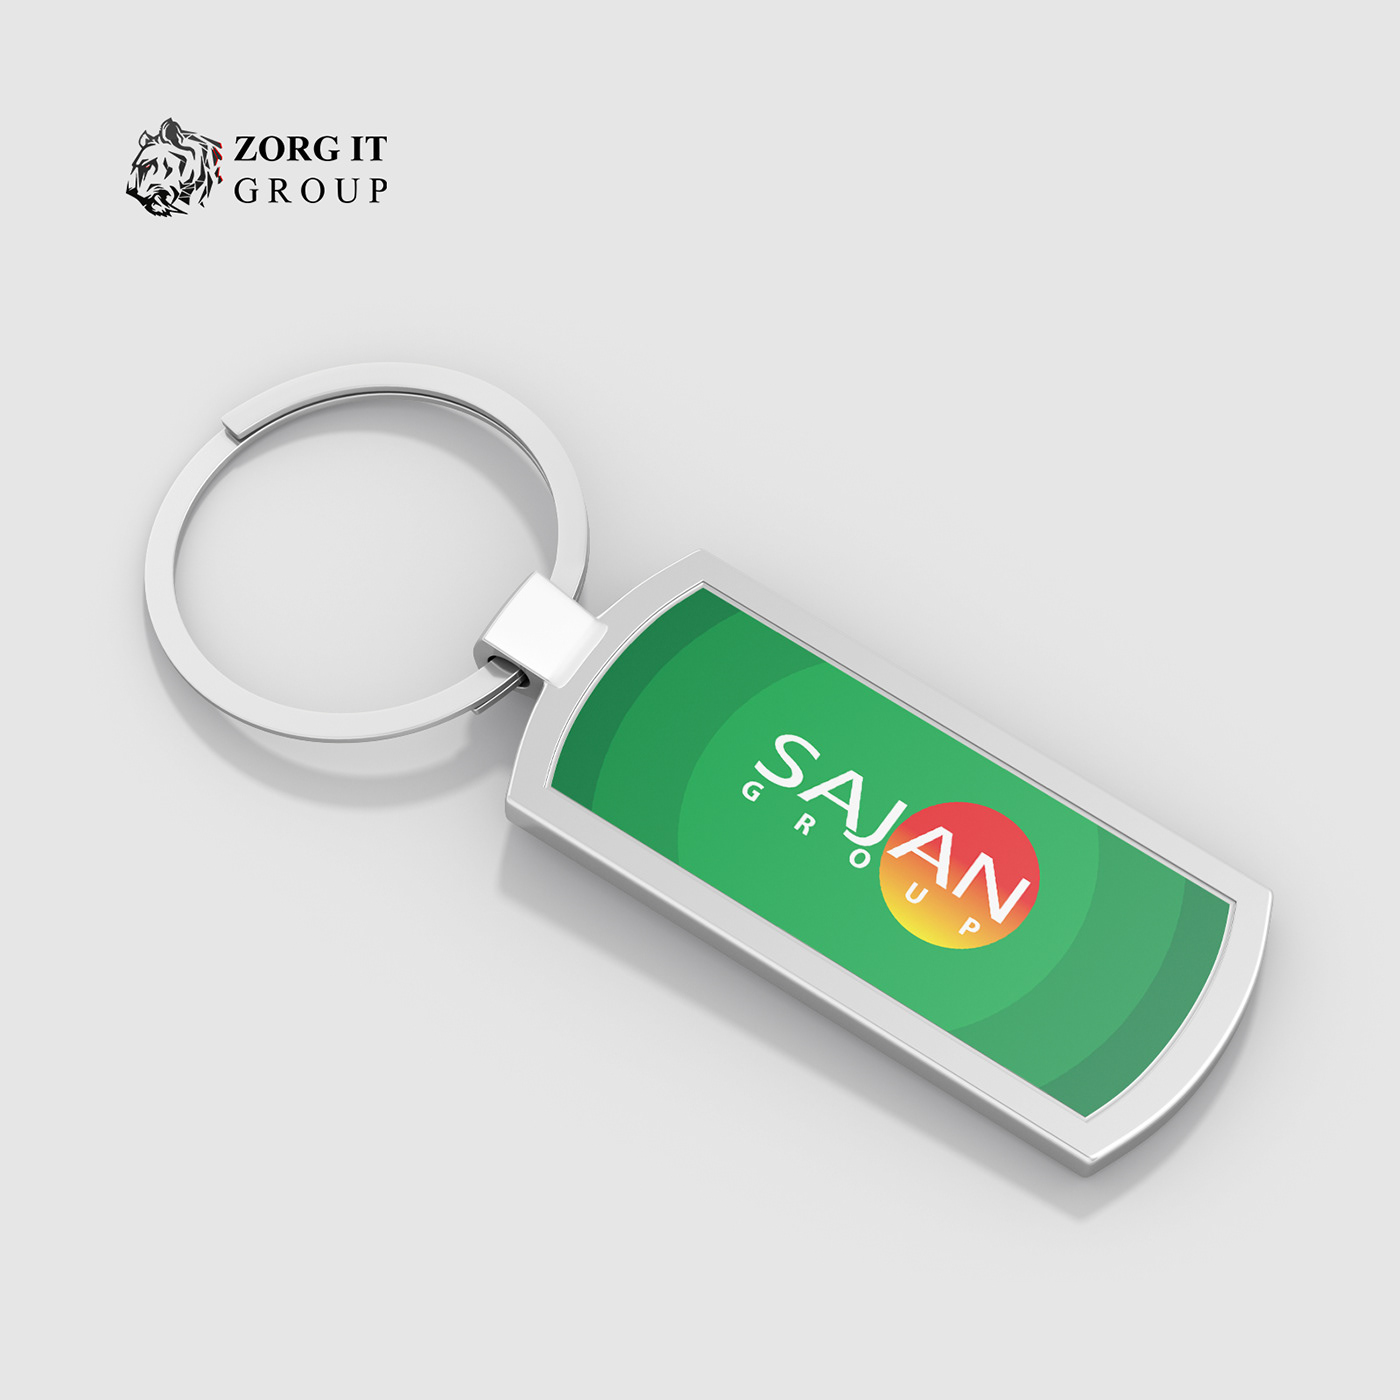 Keyring Design by Zorg IT Group.